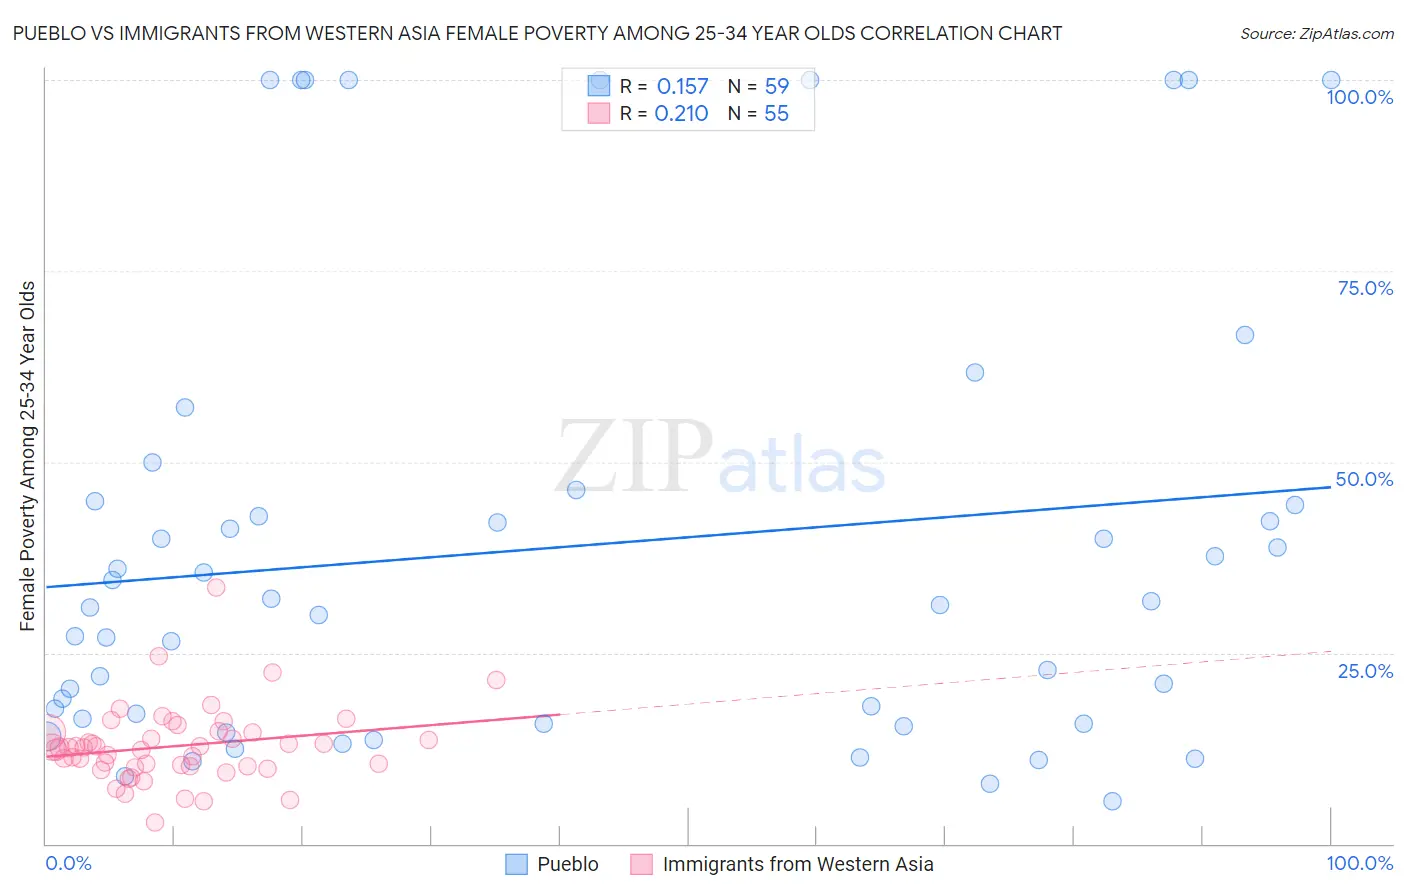 Pueblo vs Immigrants from Western Asia Female Poverty Among 25-34 Year Olds